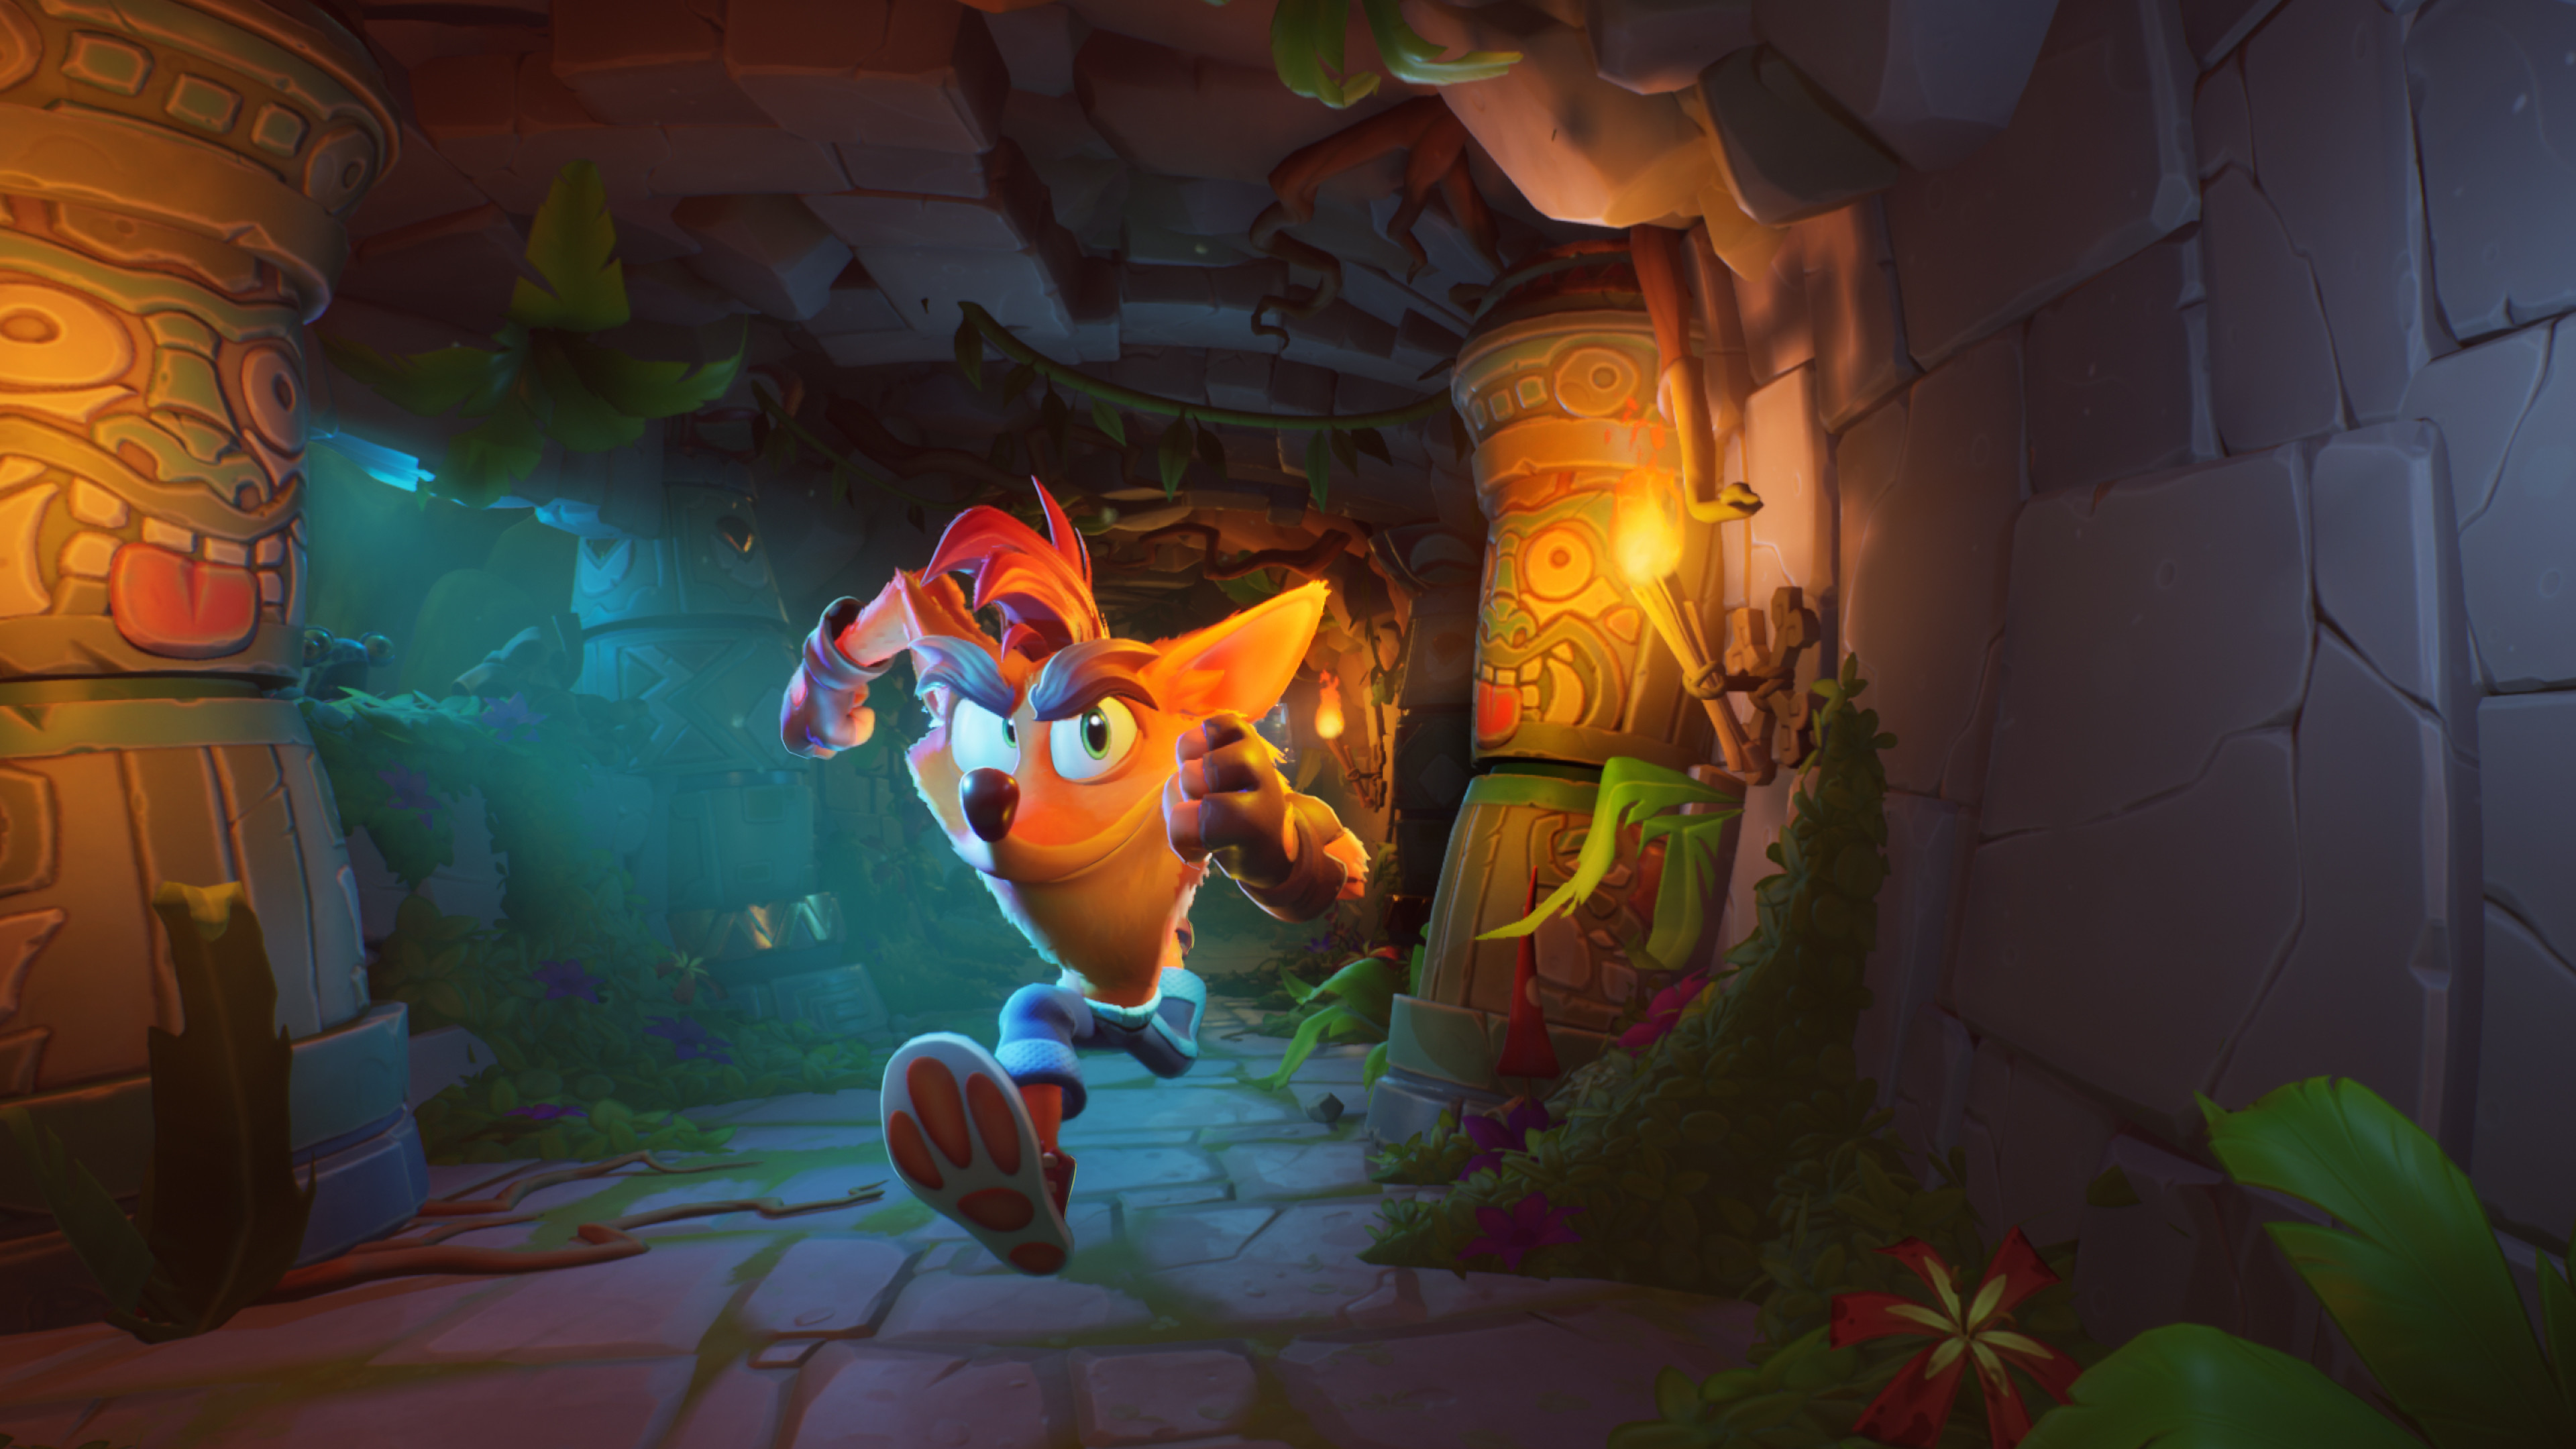 Video Game Crash Bandicoot 4: It's About Time 4k Ultra HD Wallpaper